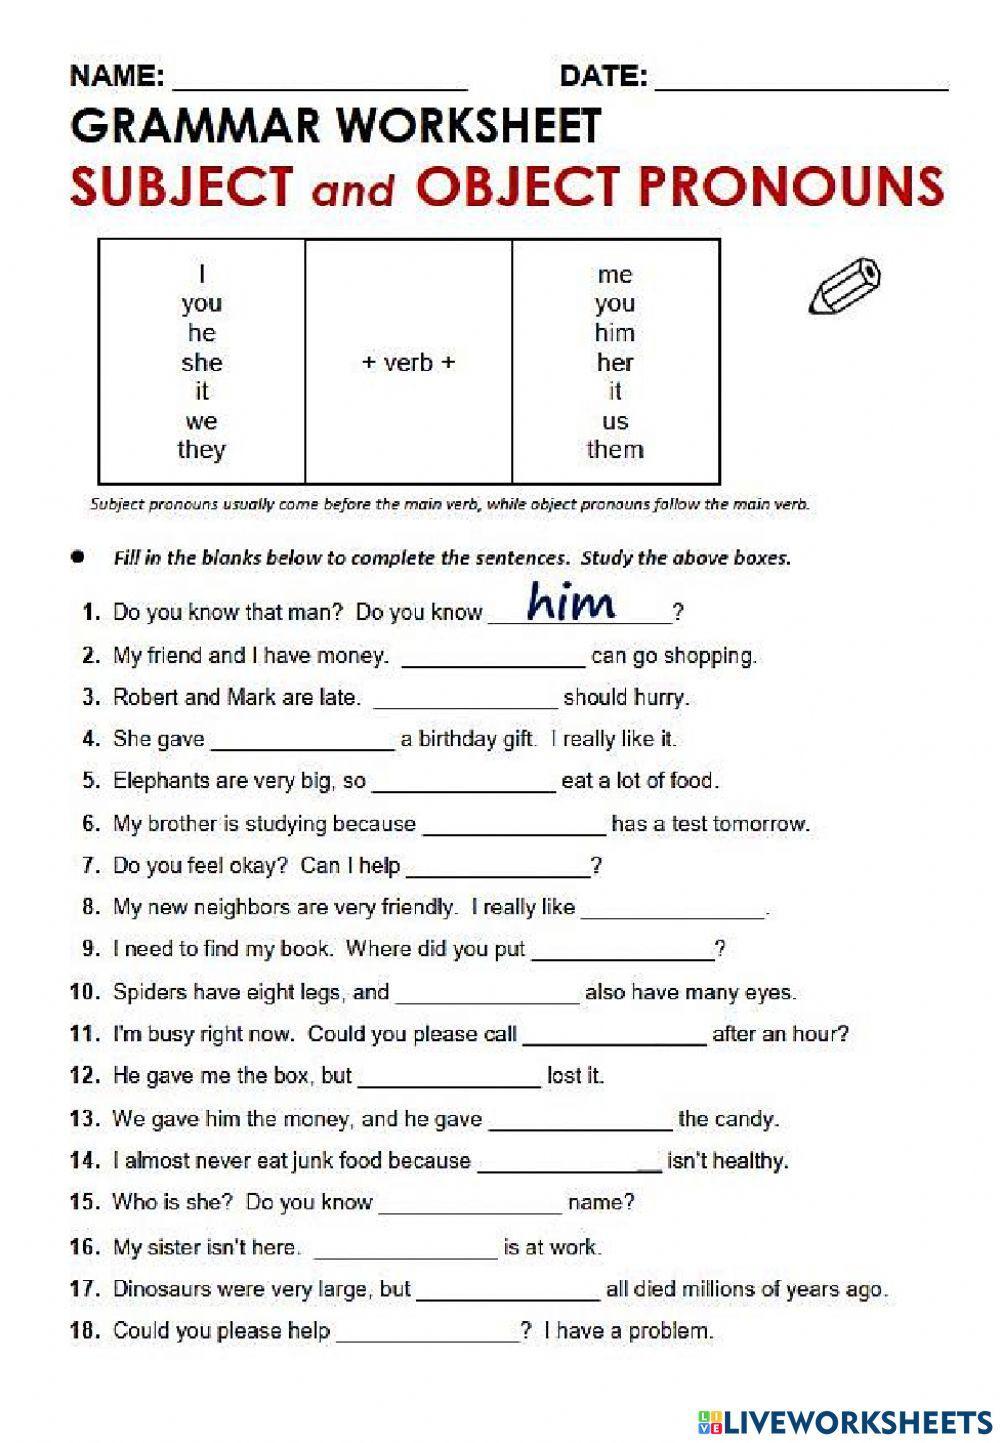 pronouns-subject-and-object-worksheet-live-worksheets